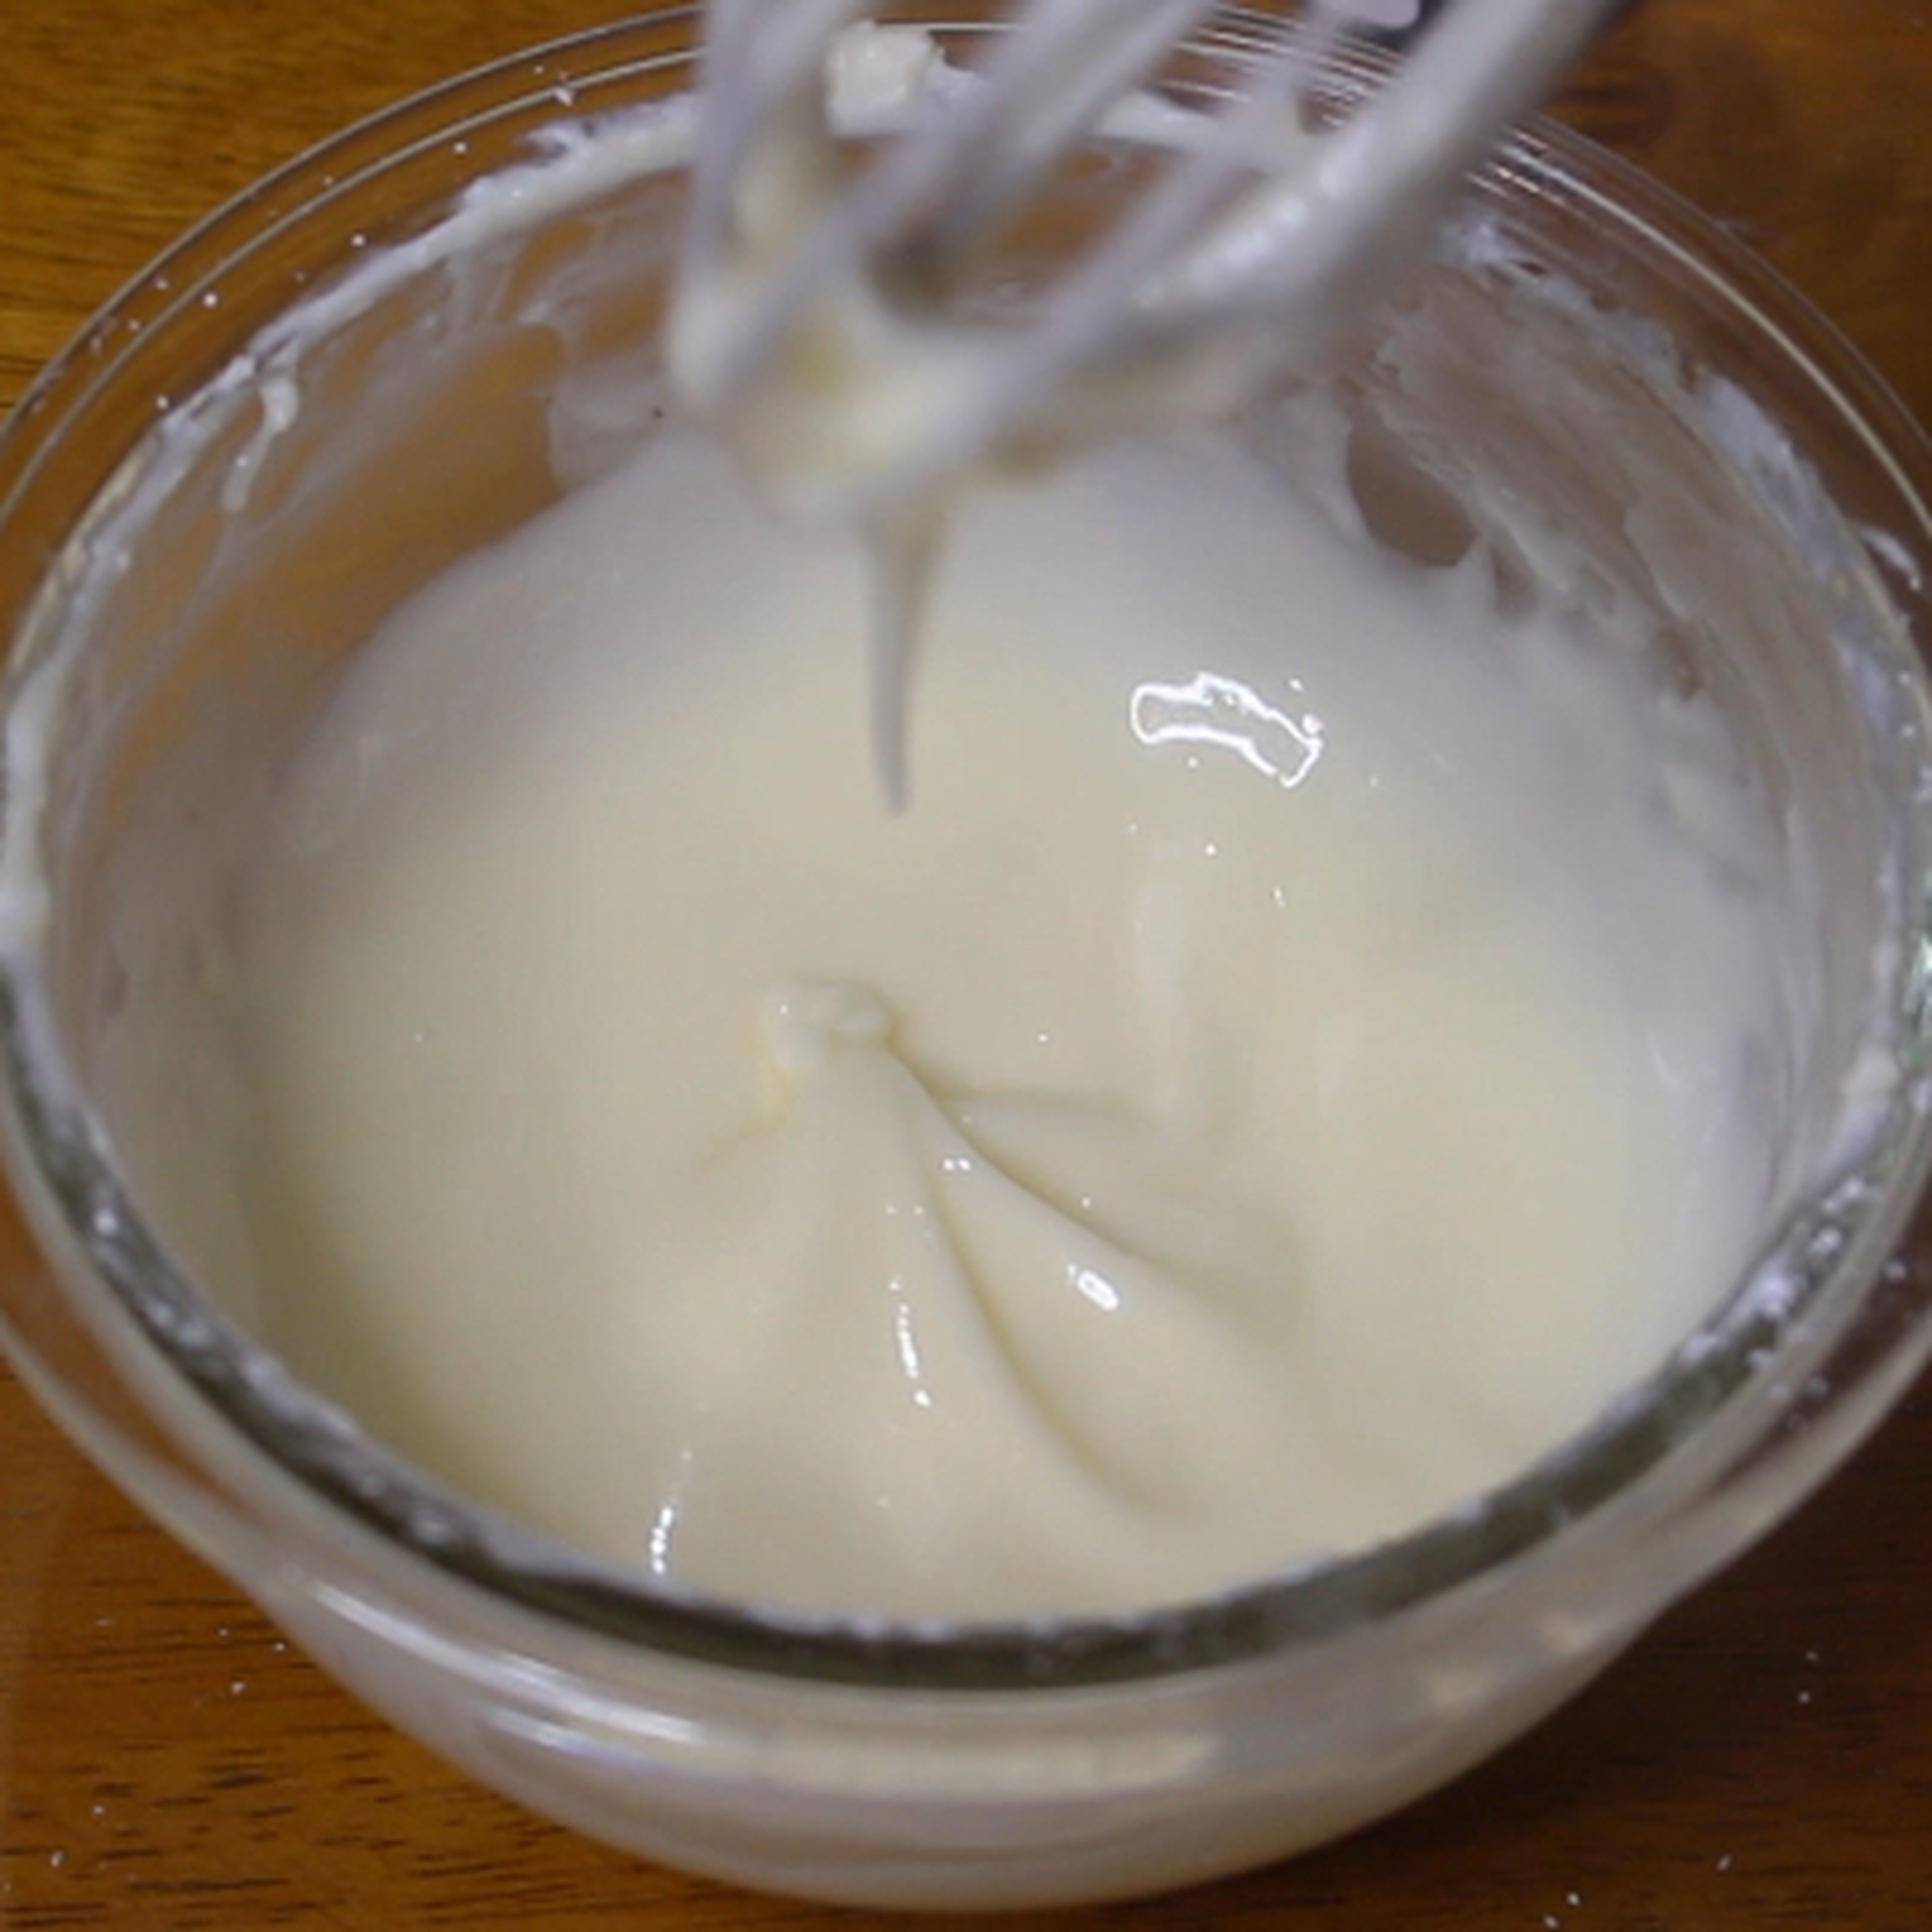 For the icing. Combine the cream cheese, confectioner's sugar, vanilla extract and whole milk in a bowl and whisk it well until smooth.